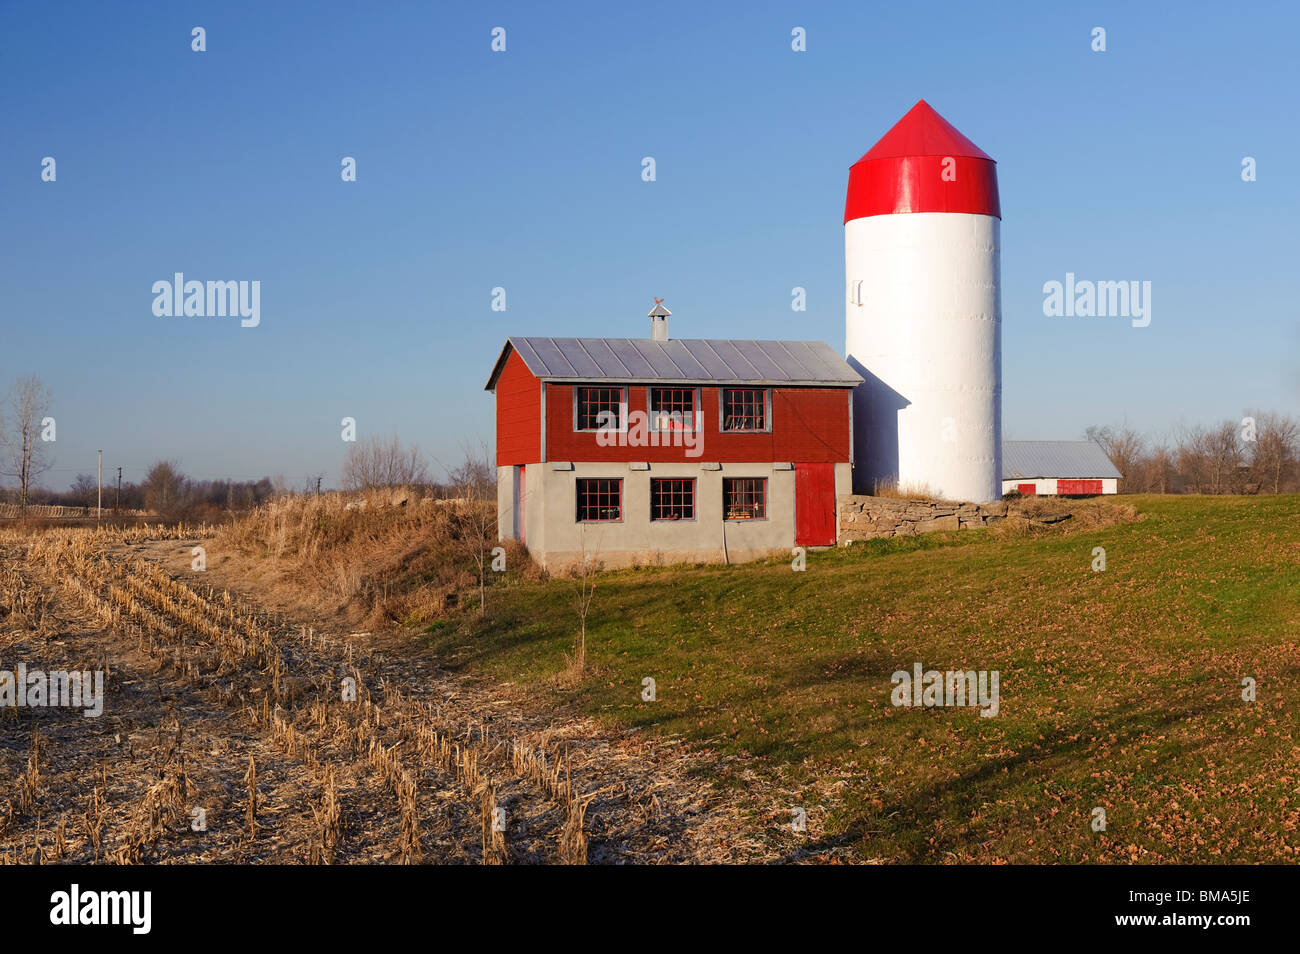 Farm building and silo in St-Augustin, North of Montreal, Quebec, Canada Stock Photo